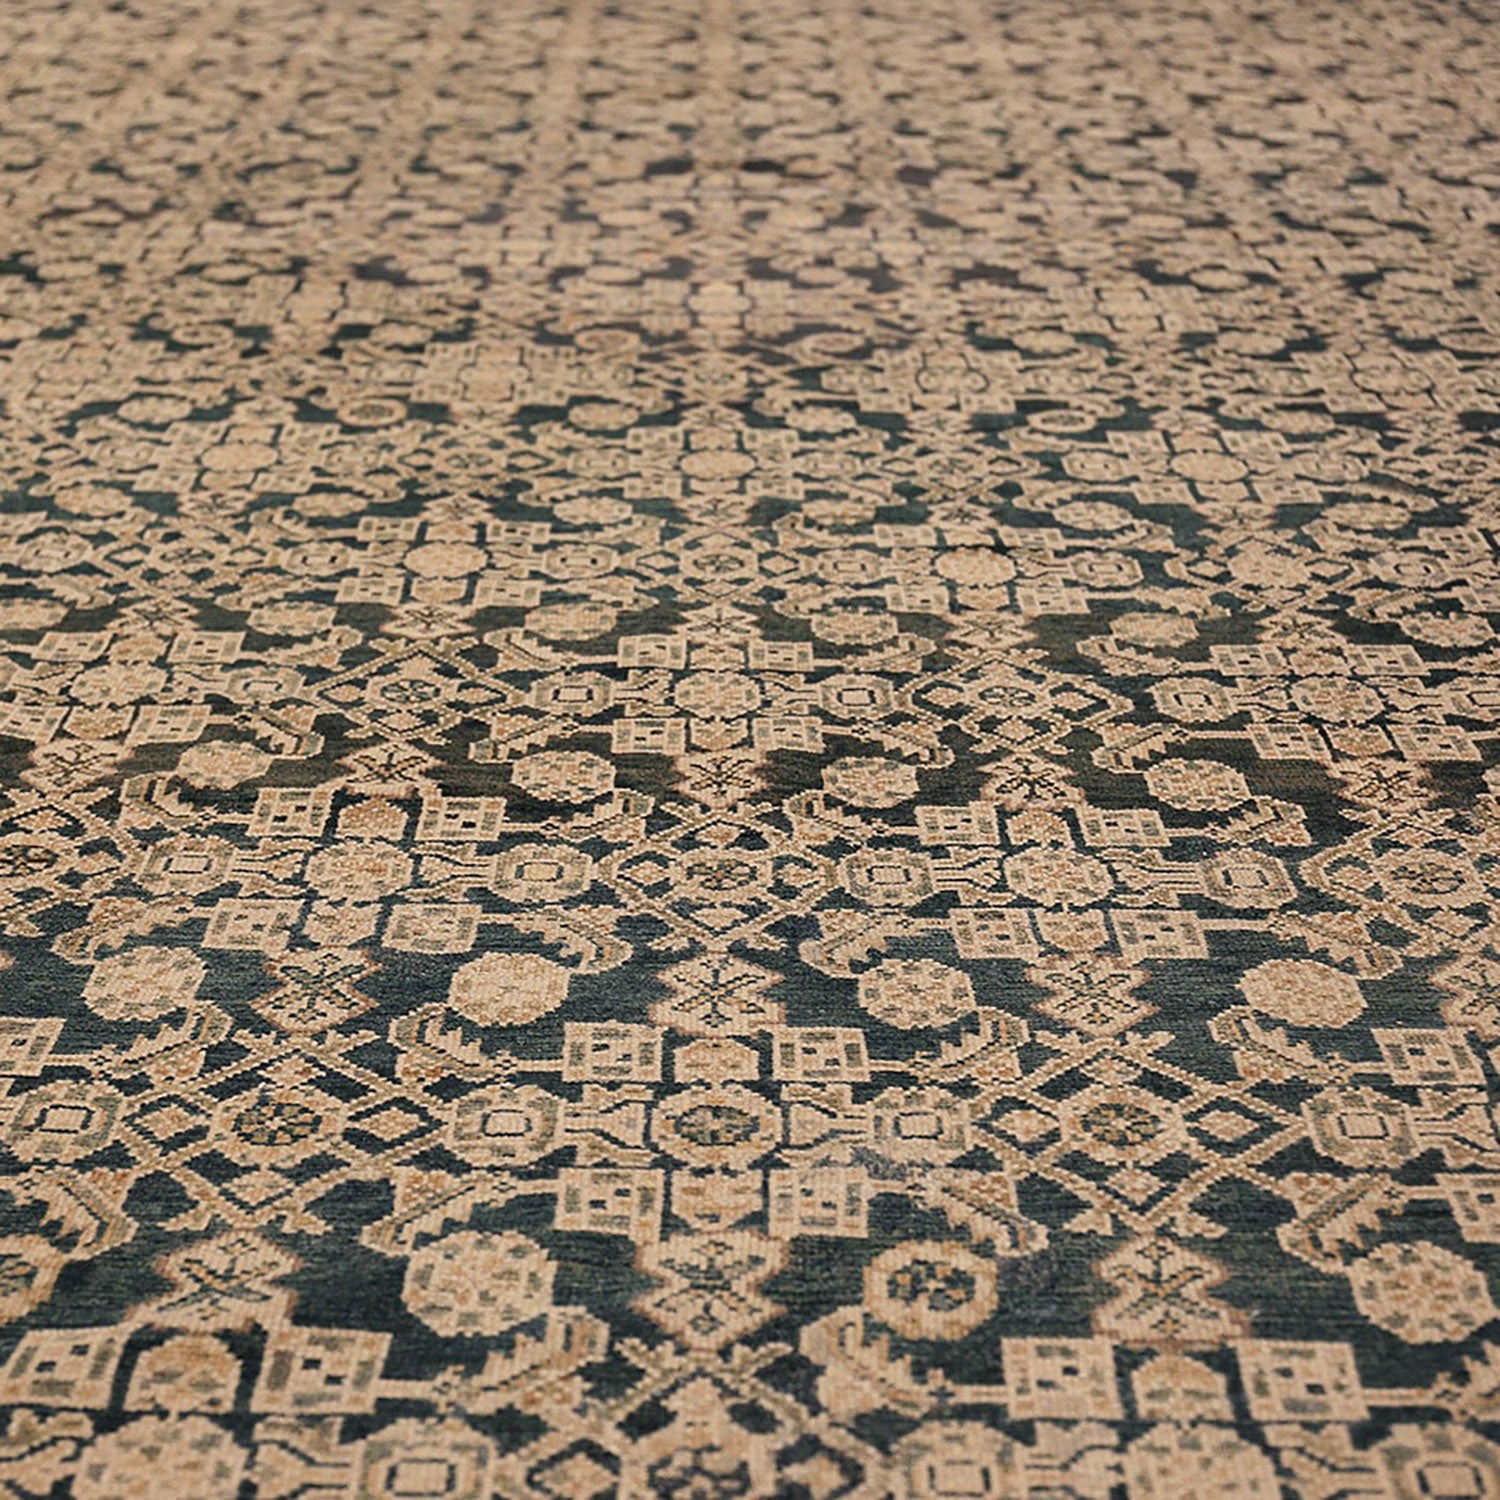 Close-up of a meticulously crafted, patterned carpet exuding elegance and luxury.